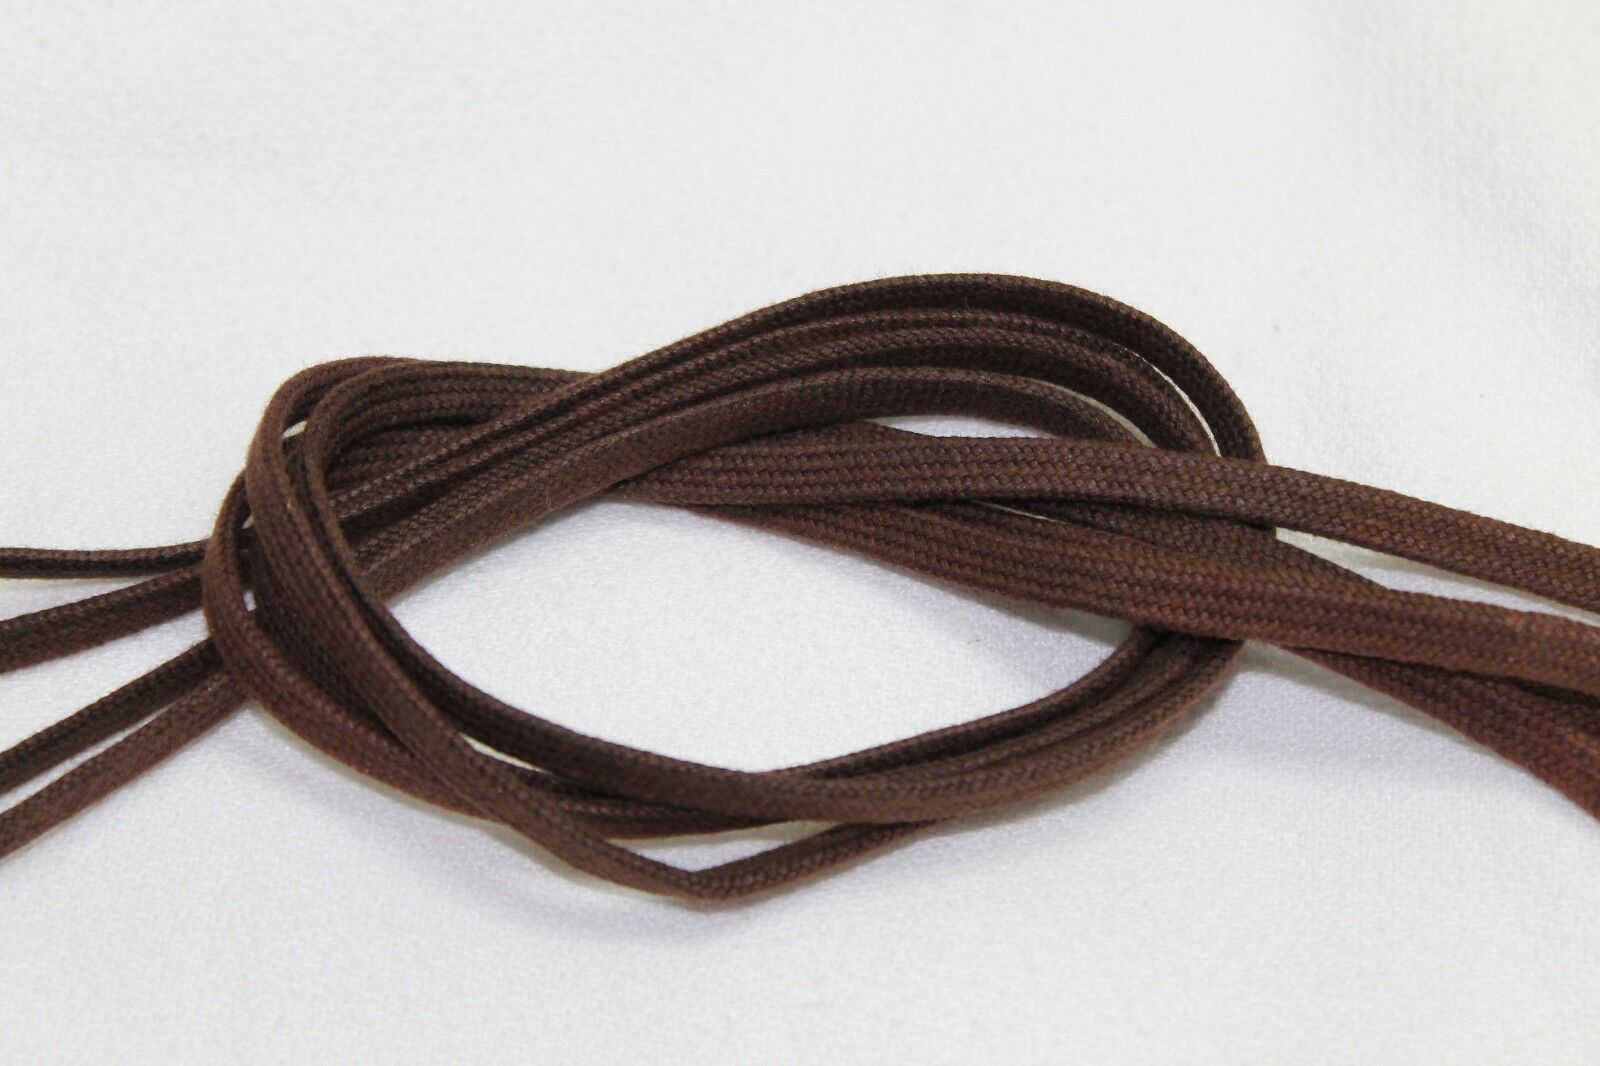 WWII US brown waxed shoelaces boot laces shoe strings 38 inches 96.5cm pair E923 Без бренда